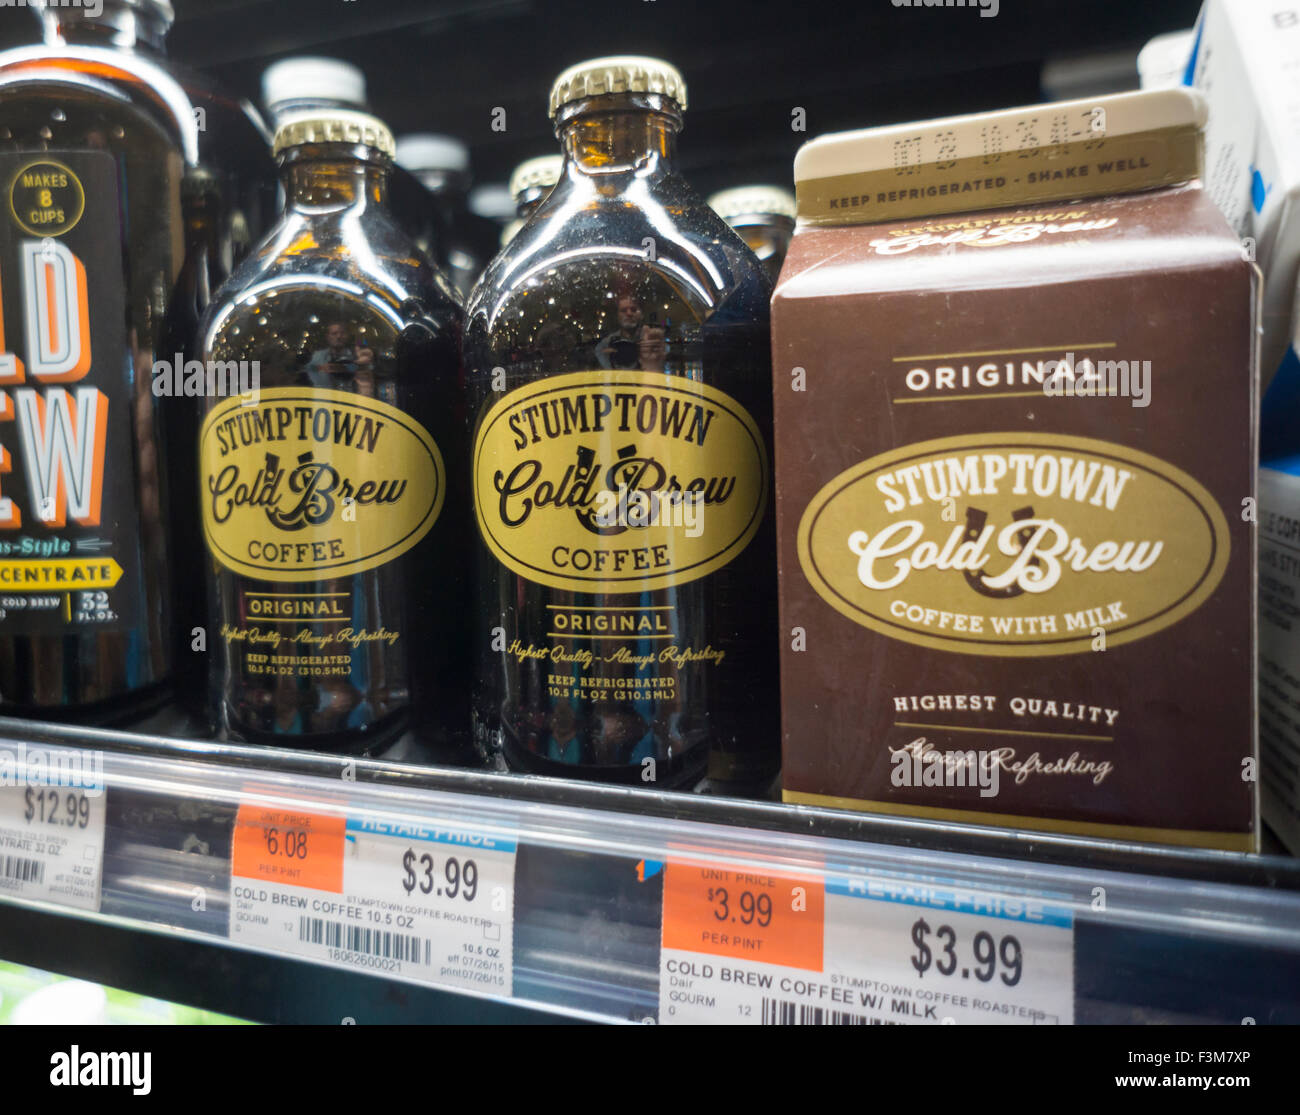 Containers of Stumptown Coffee Roasters' Cold Brewed Coffee in a supermarket in New York on Wednesday, October 7, 2015. Peet's Coffee & Tea has bought Stumptown Coffee Roasters for an undisclosed sum. Stumptown has a cult-like following and the two brands are expected to operate independently. (© Richard B. Levine) Stock Photo